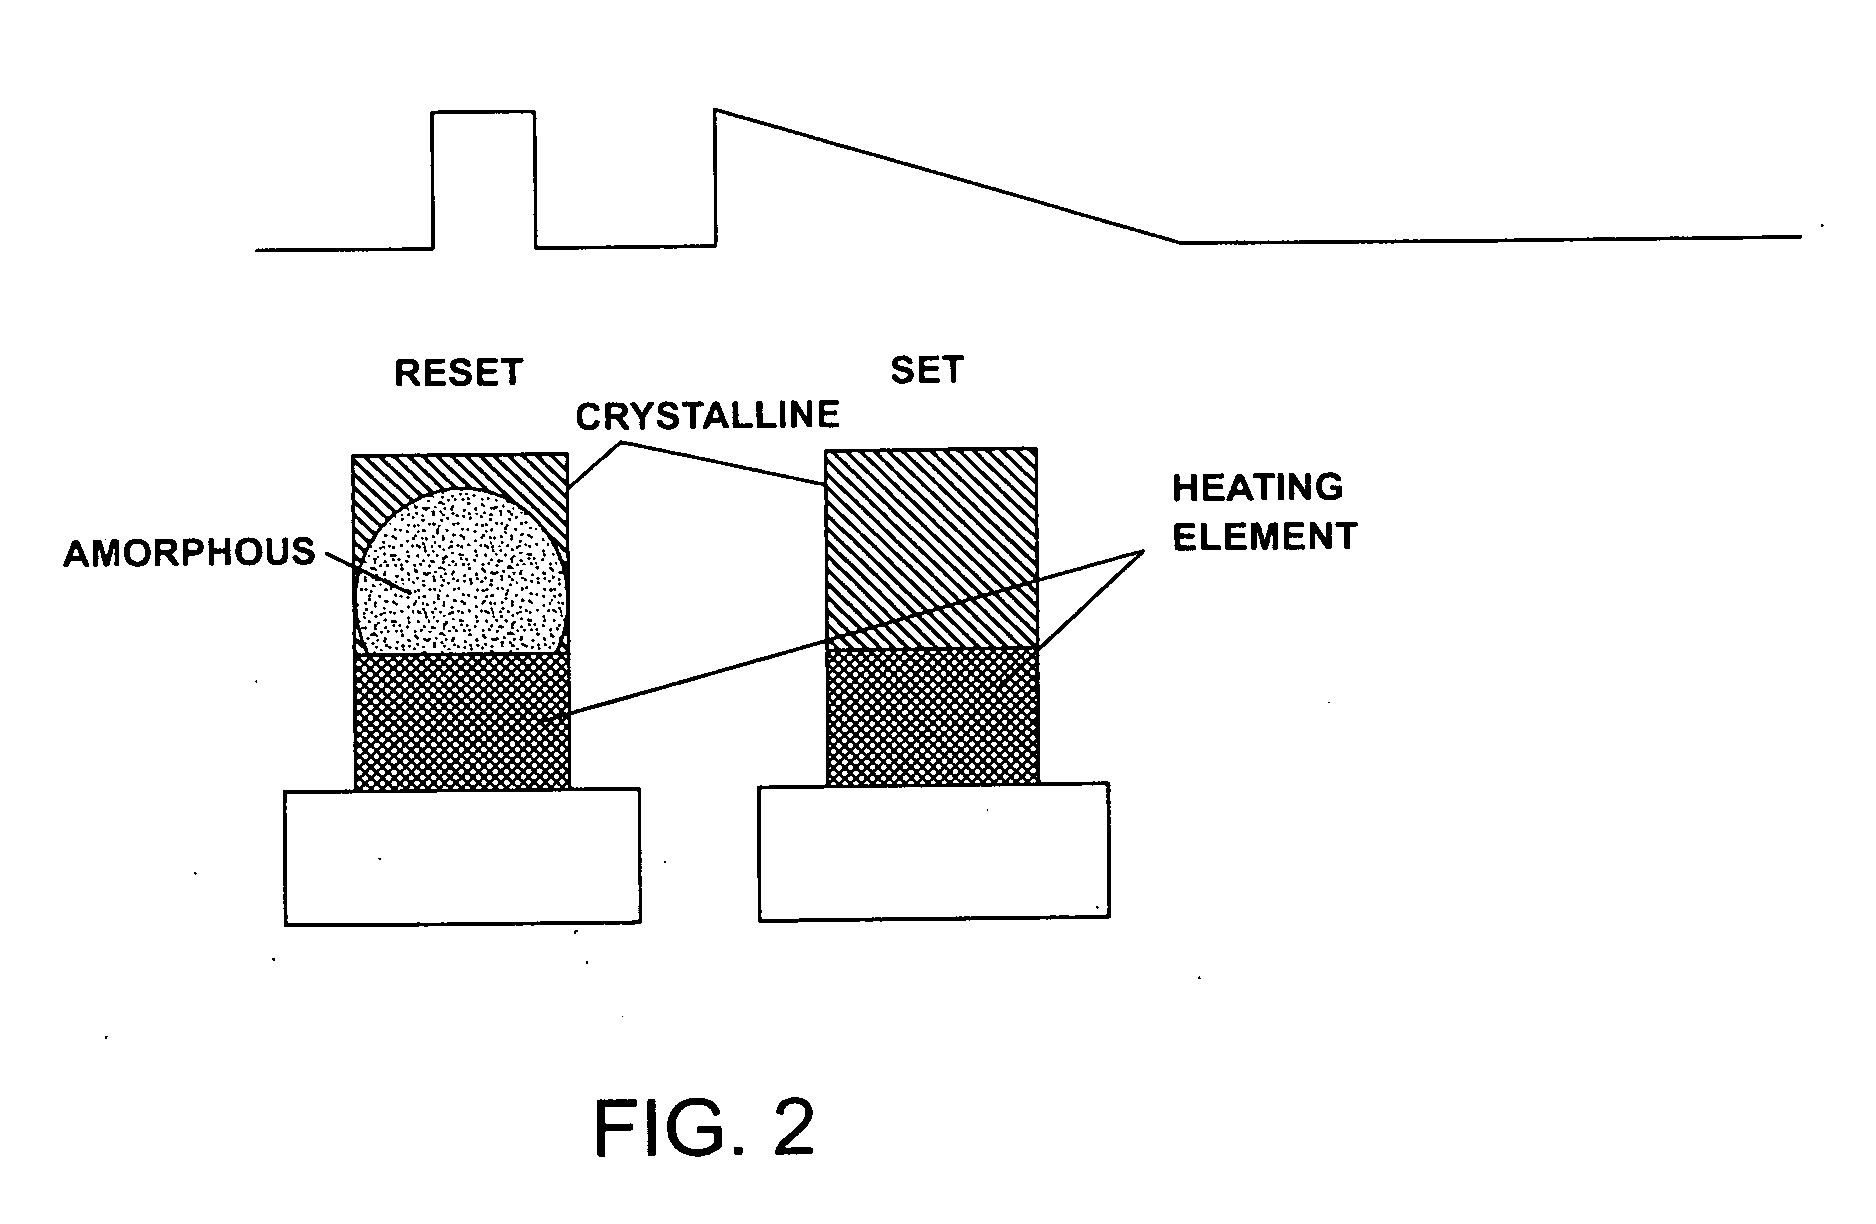 Multi-terminal phase change devices